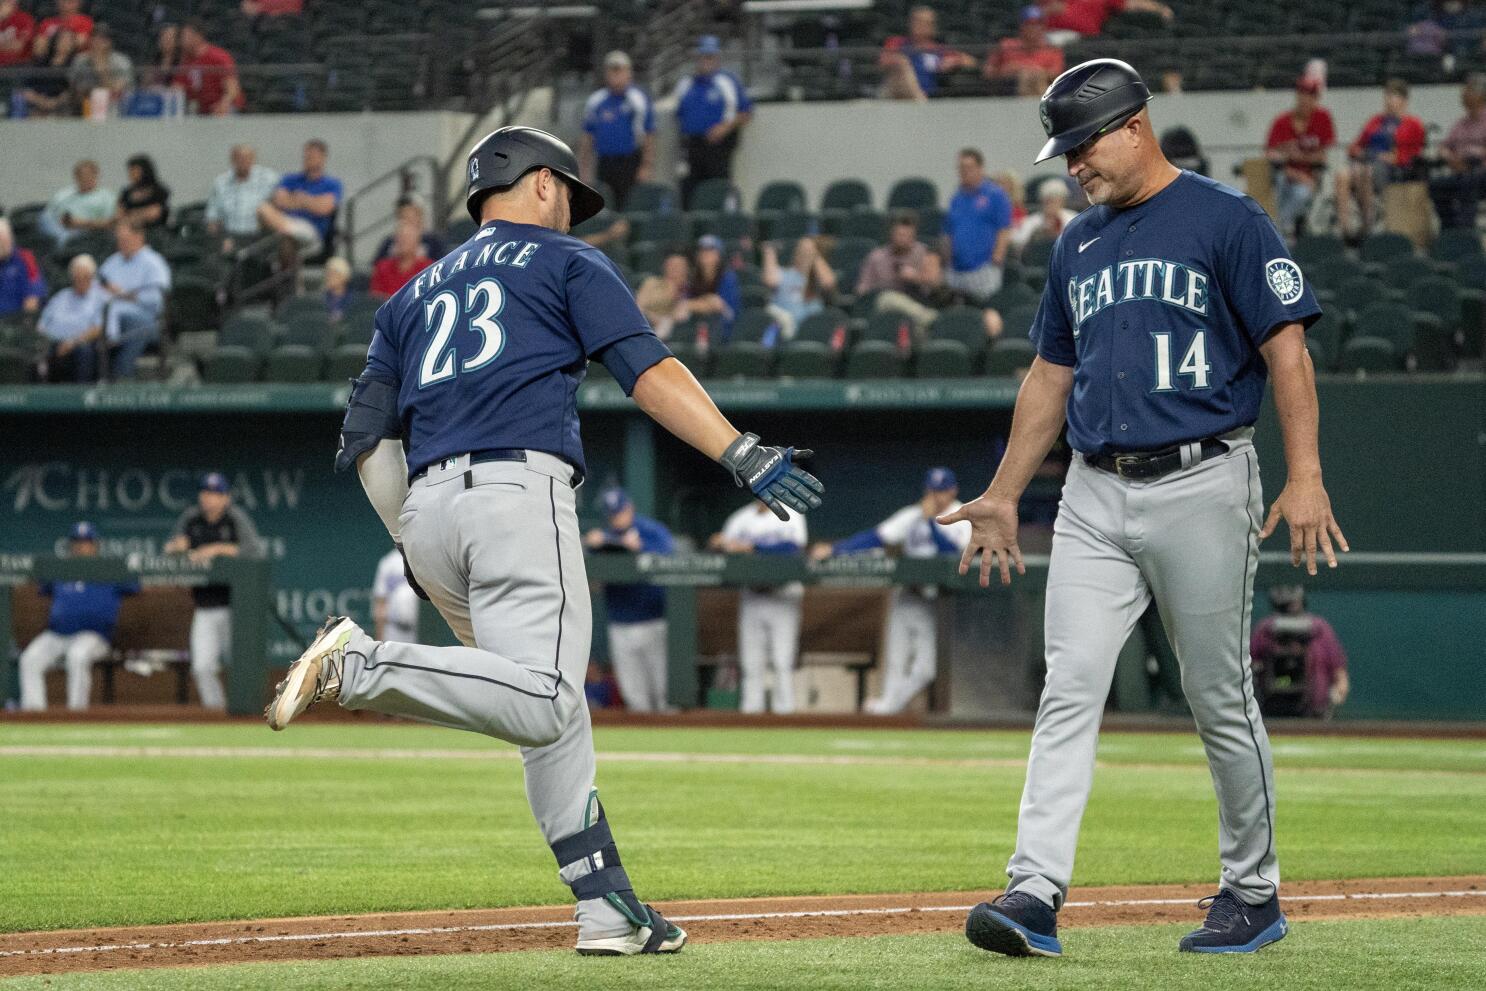 Seattle sweep: France 11th-inning HR as M's win 9-8 at Texas - The